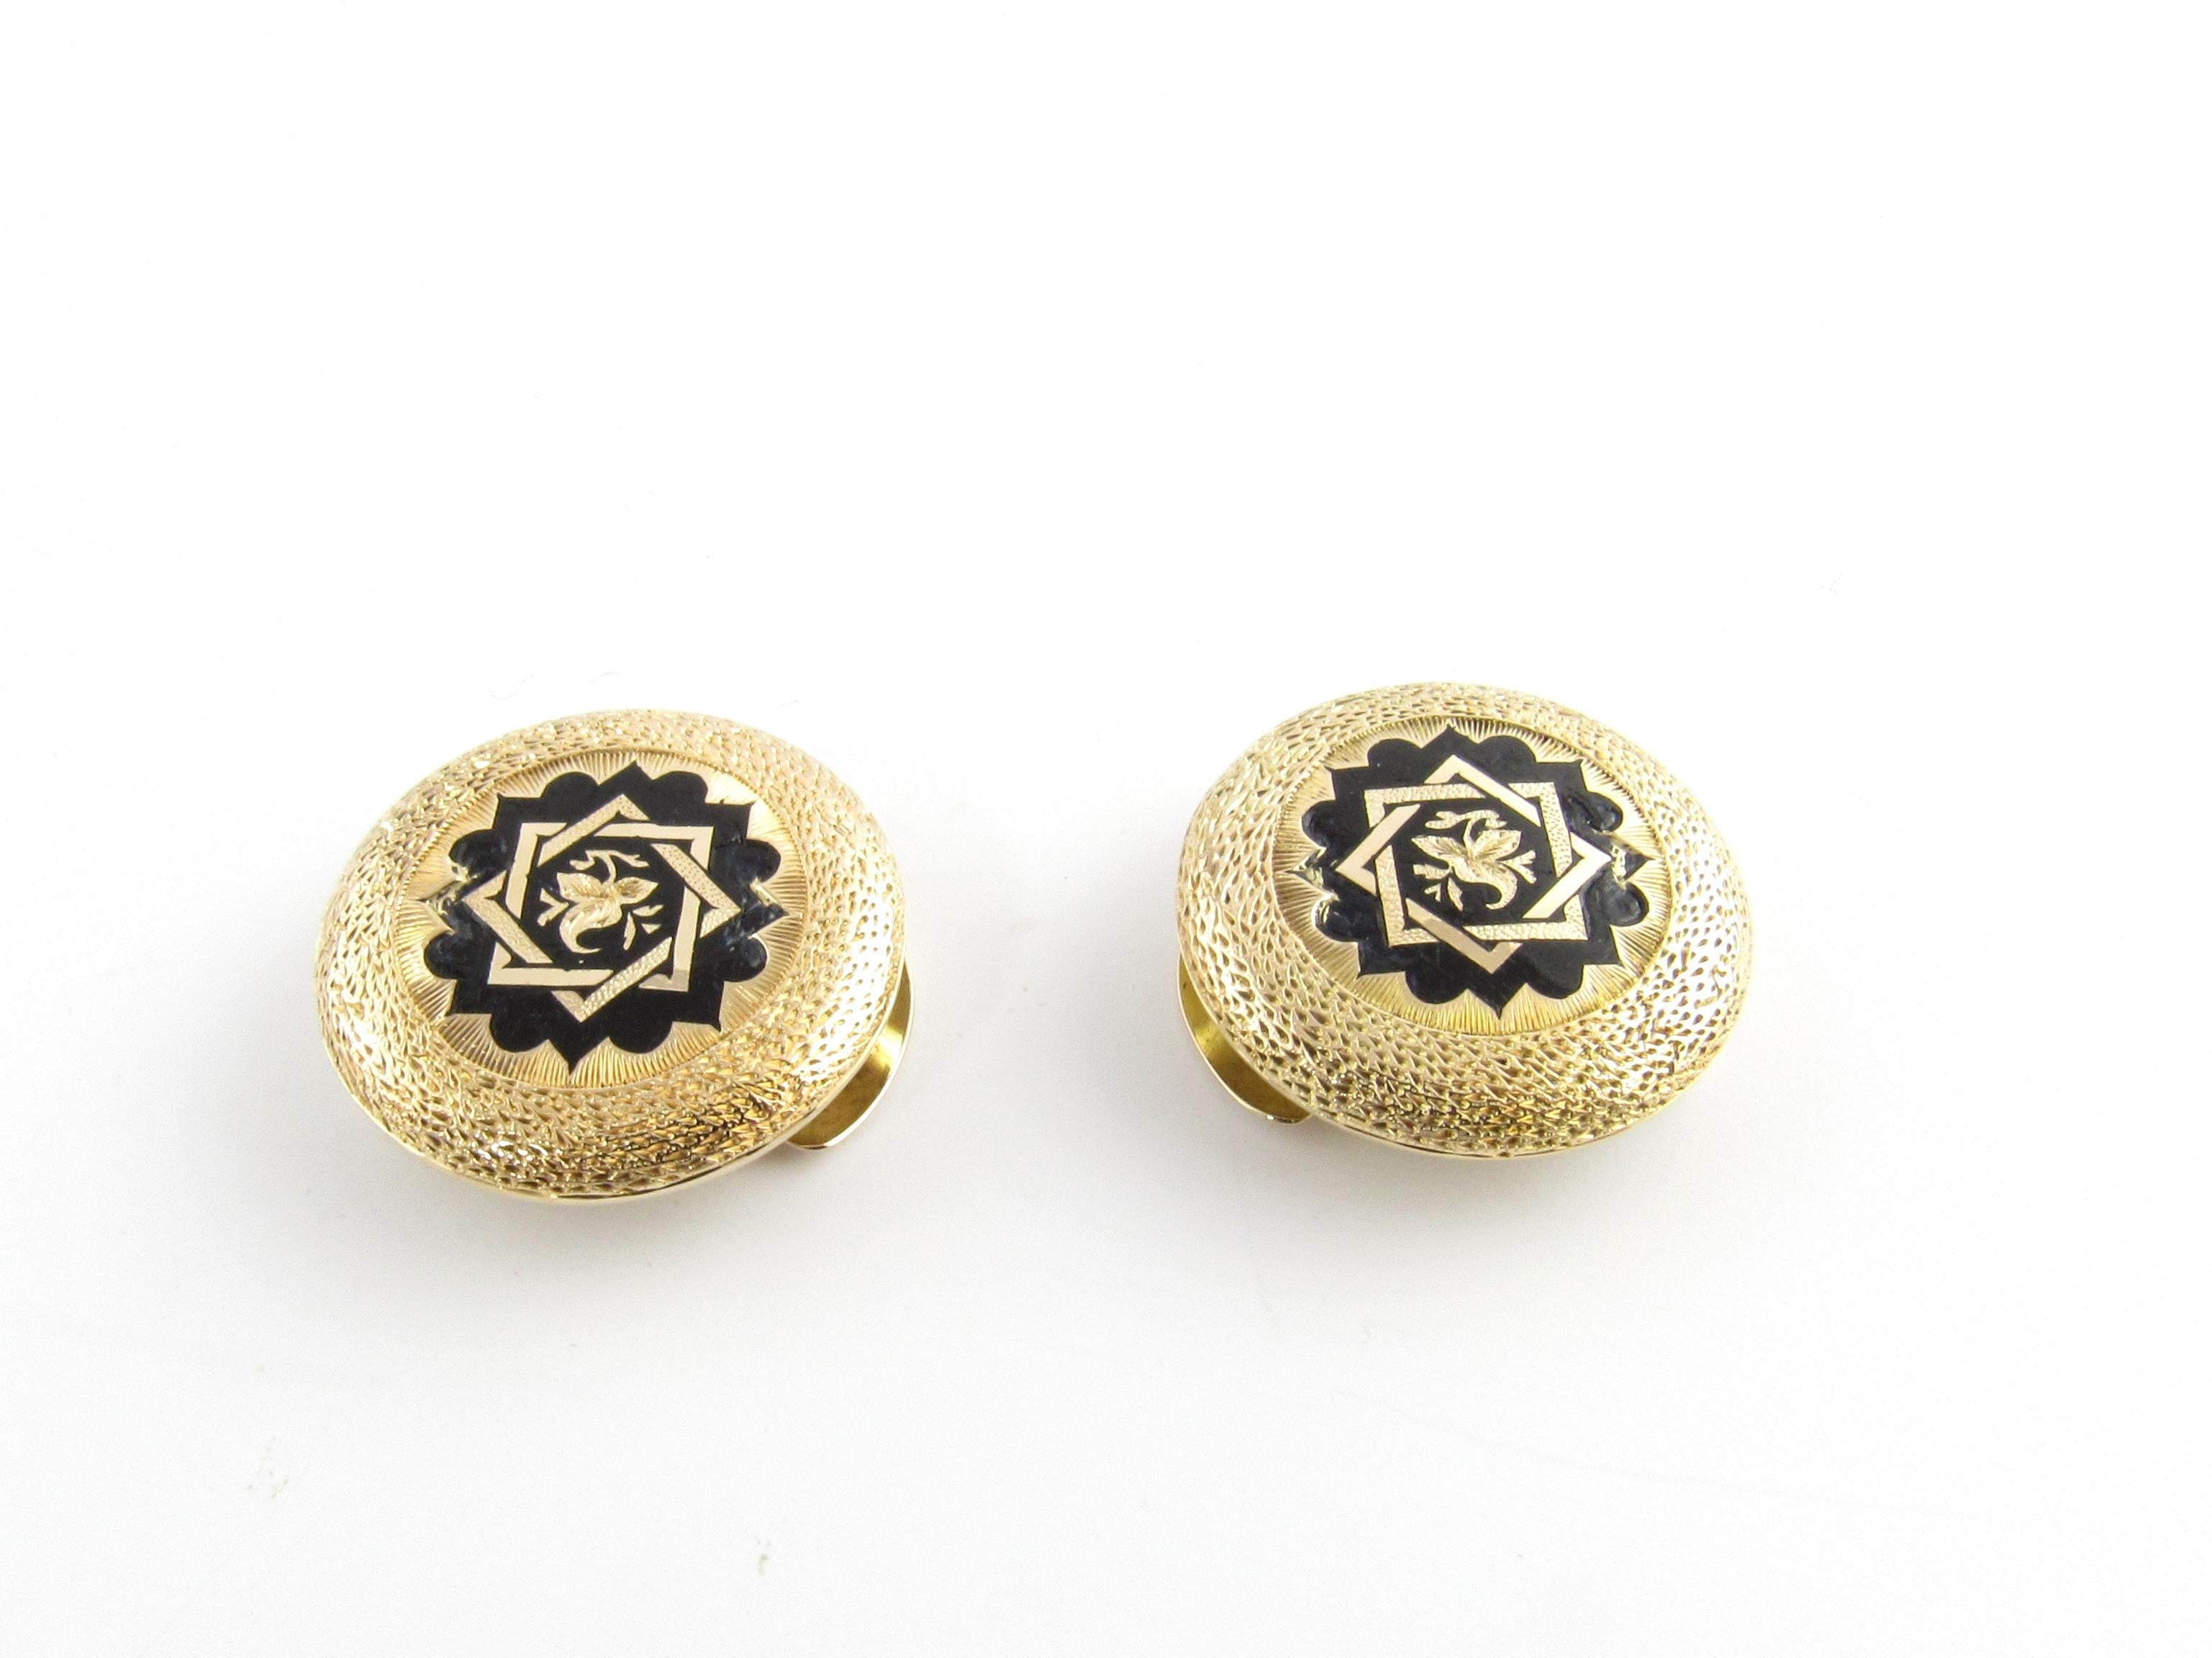 Vintage 14 Karat Yellow Gold and Enamel Button Covers

These elegant button covers (set of 2) are each crafted in beautifully detailed 14K yellow gold and black enamel.

Size: 20 mm each

Weight: 3.3 dwt. / 5.2 gr.

Acid tested for 14K gold.

Very